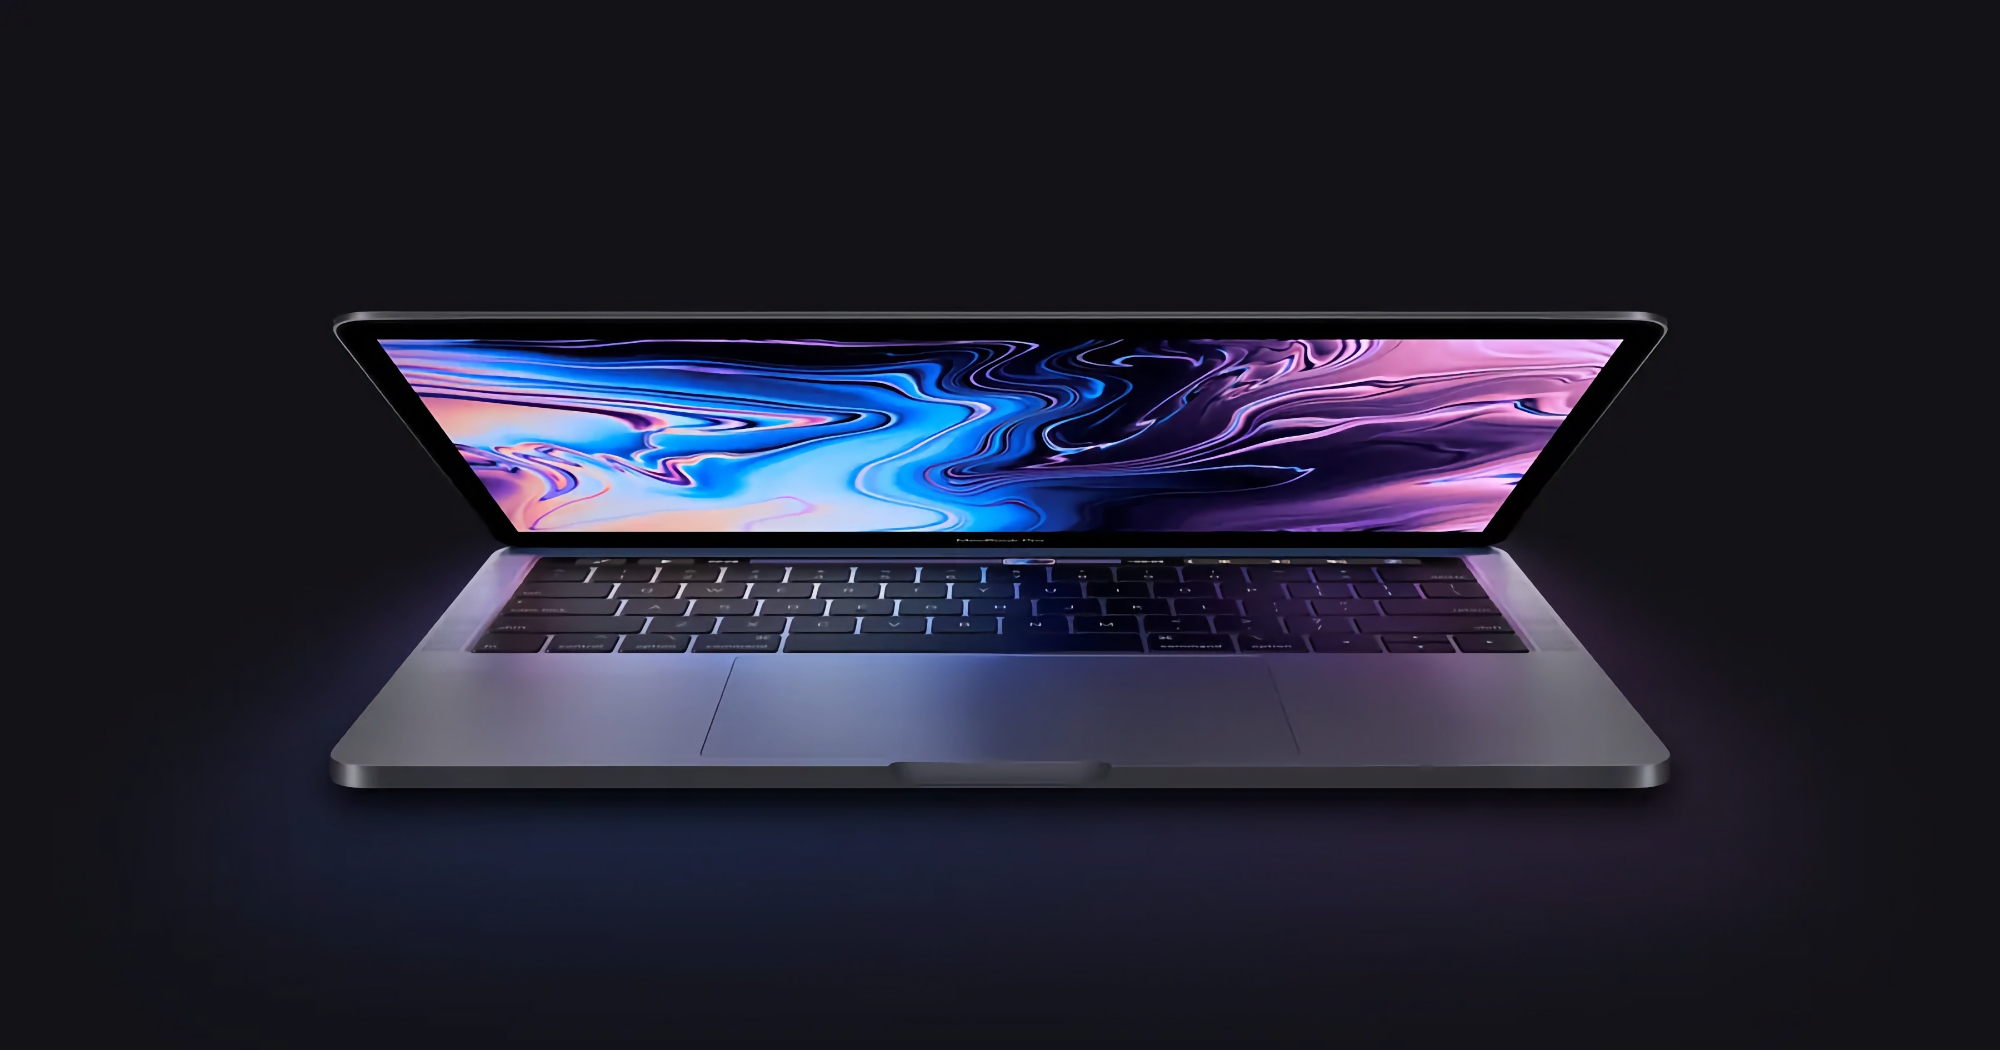 Rumour: Apple is preparing to release a new 13-inch version of the MacBook Pro with the M3 chip